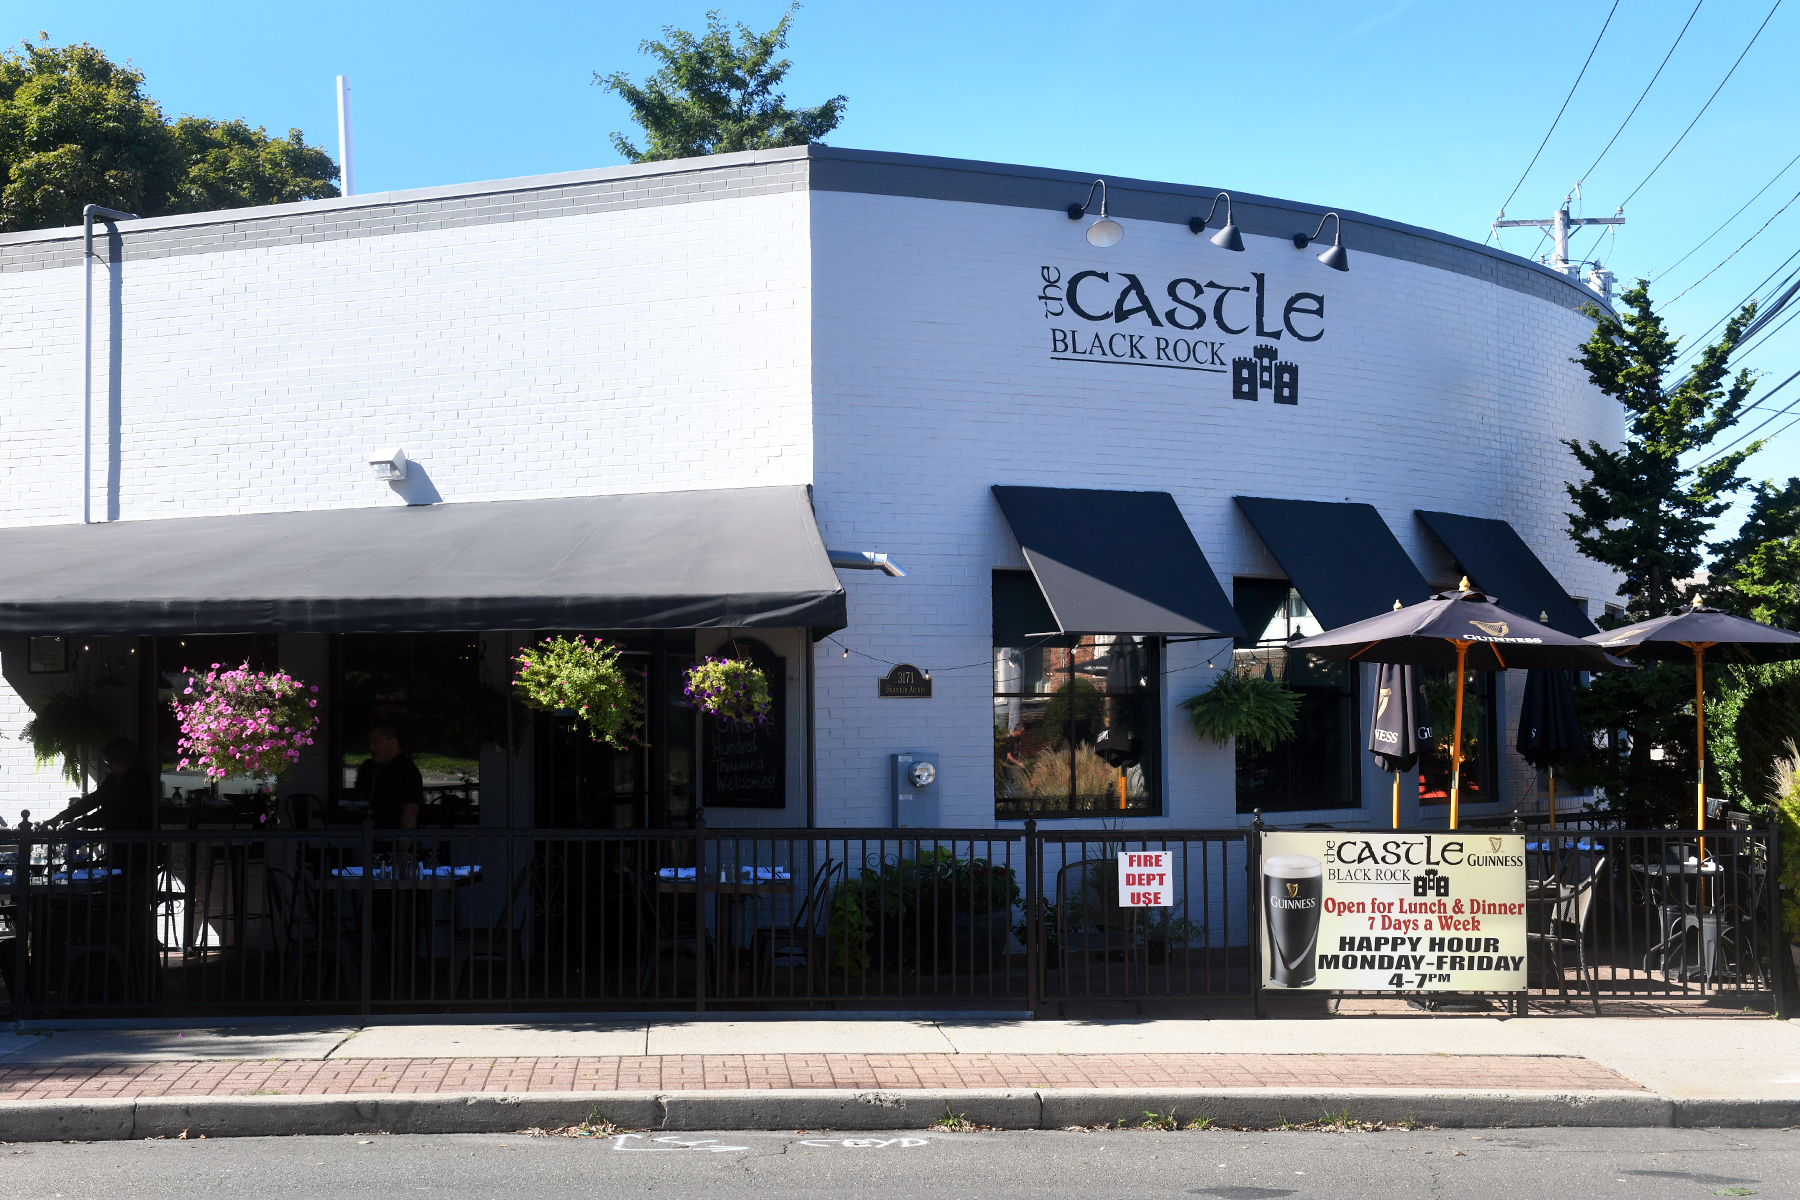 The Castle returns to Black Rock after 7 years in Fairfield